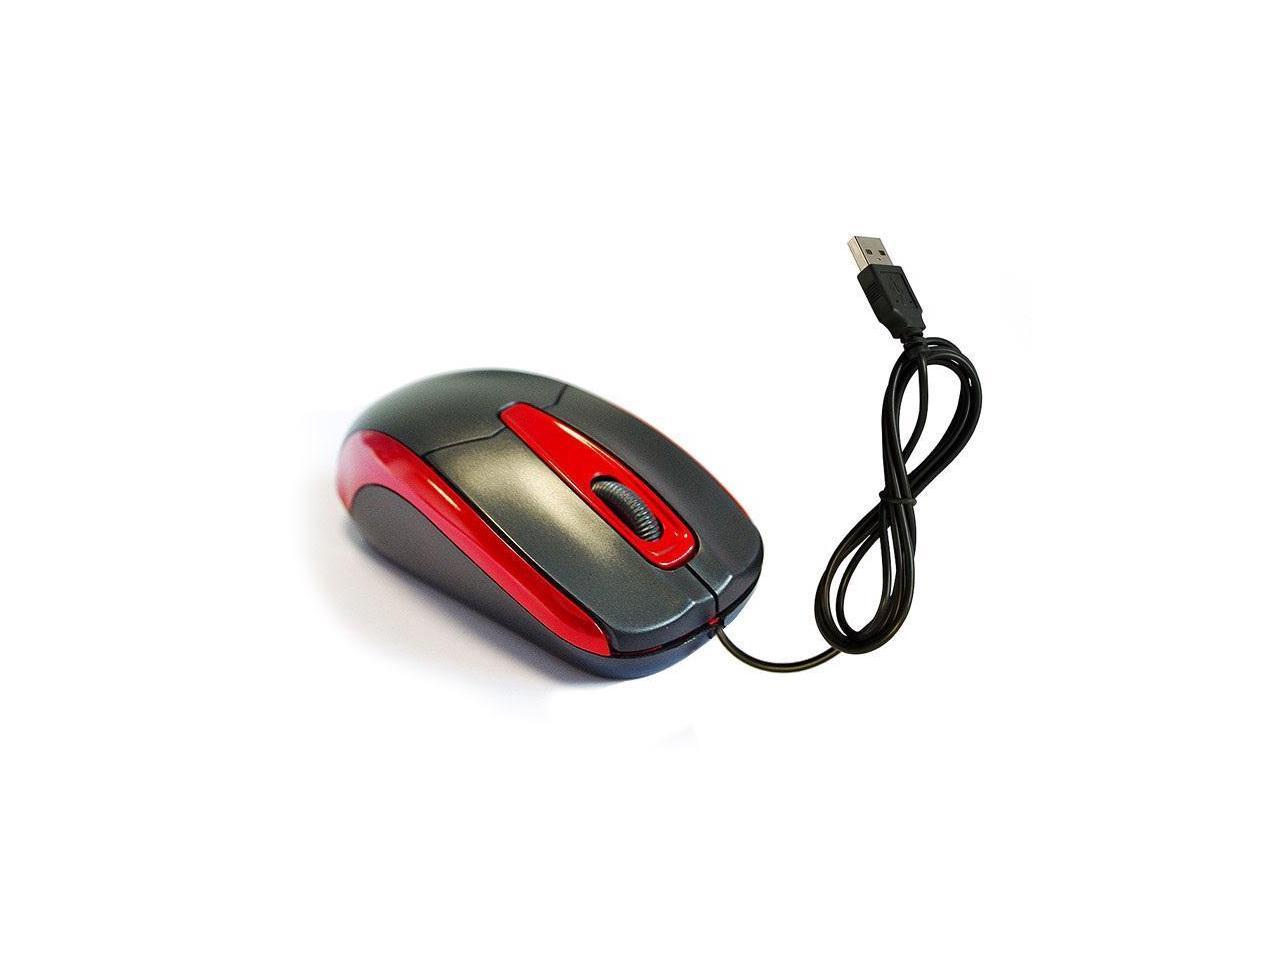 NEON Optical USB Mouse Dual-button with scroll-wheel Black/Orange